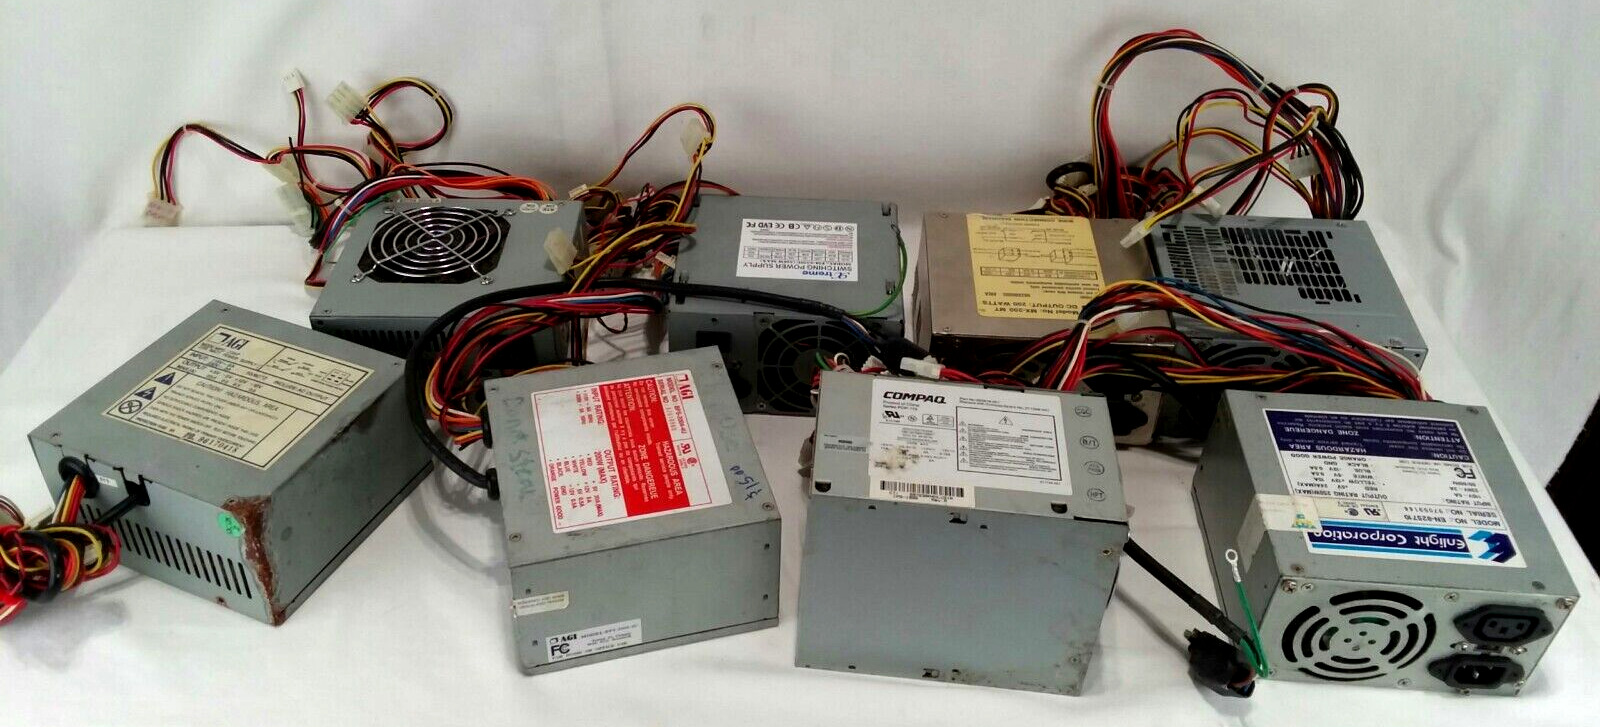 LOT OF 8 - Different Assorted Computer Power Supply Units w/ Wiring - untested